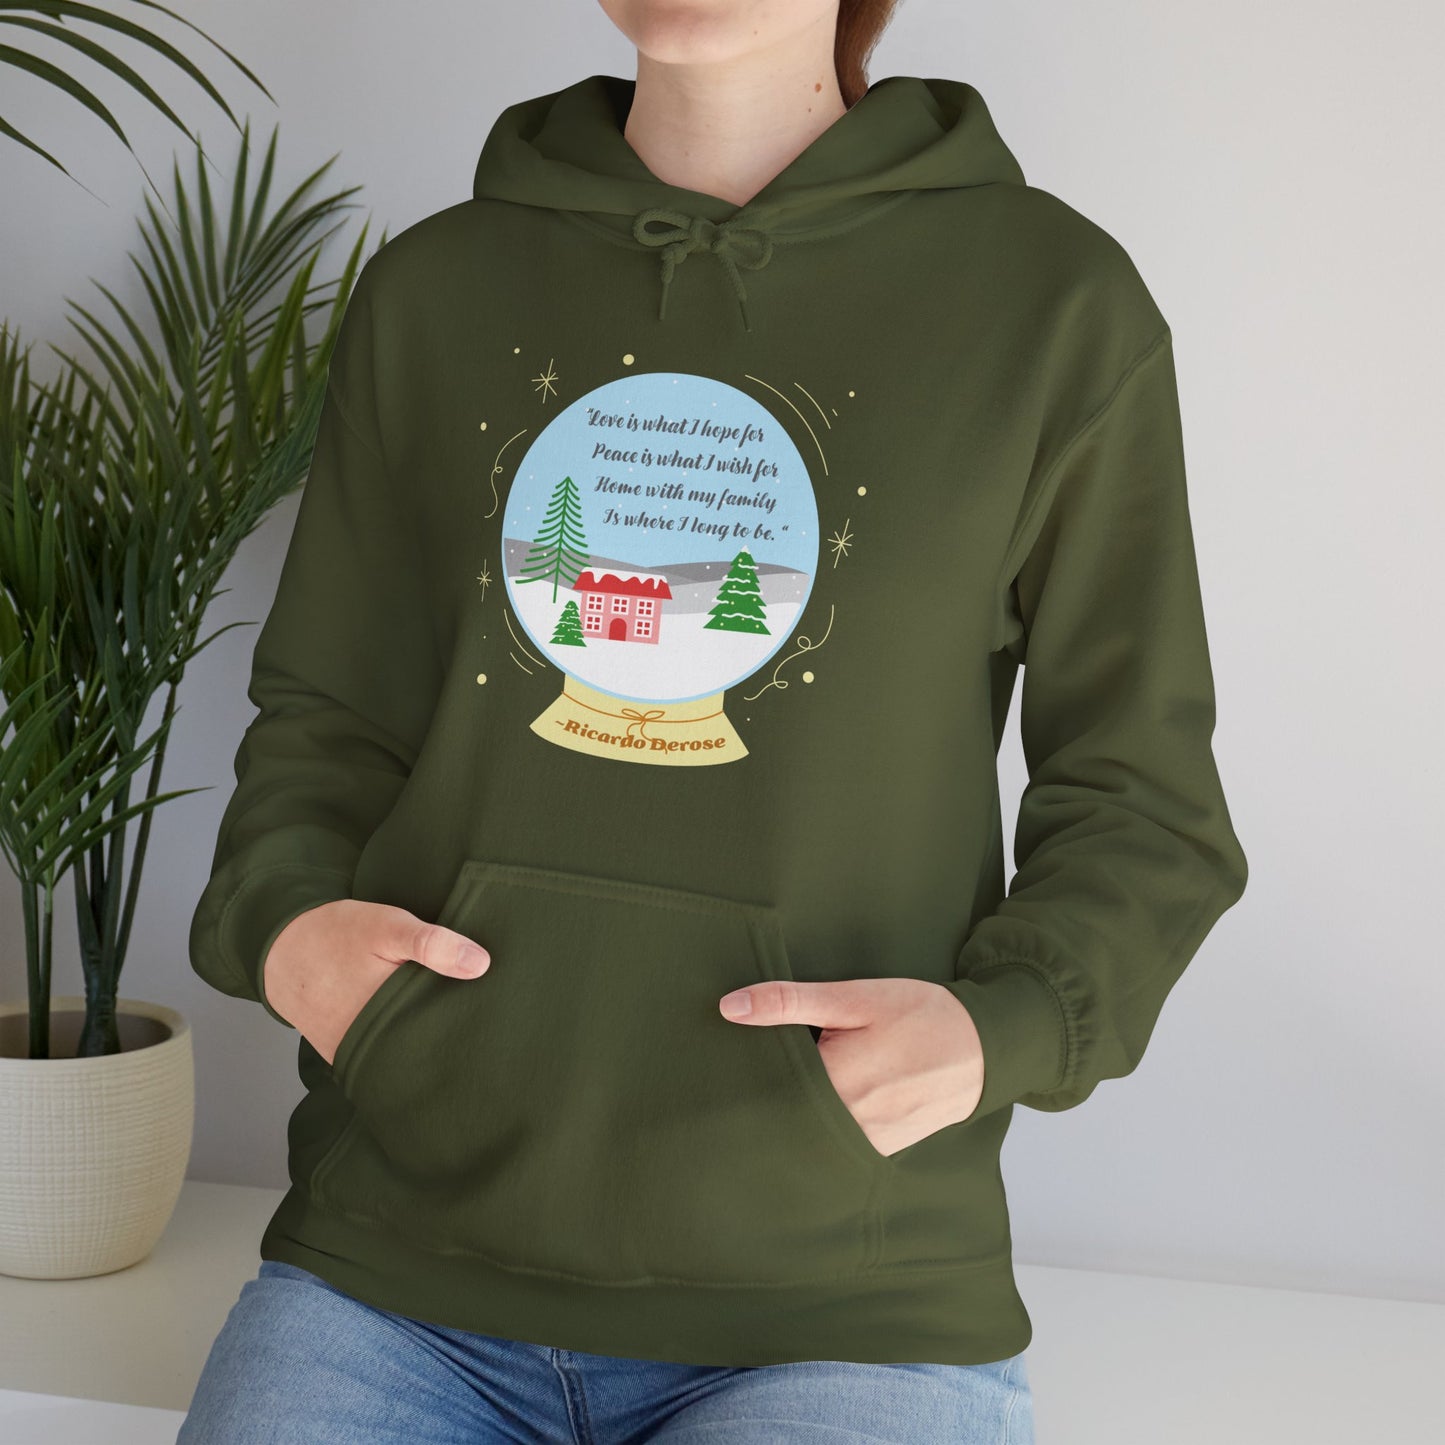 Christmas Wish for Peace Unisex Heavy Blend Hoodie